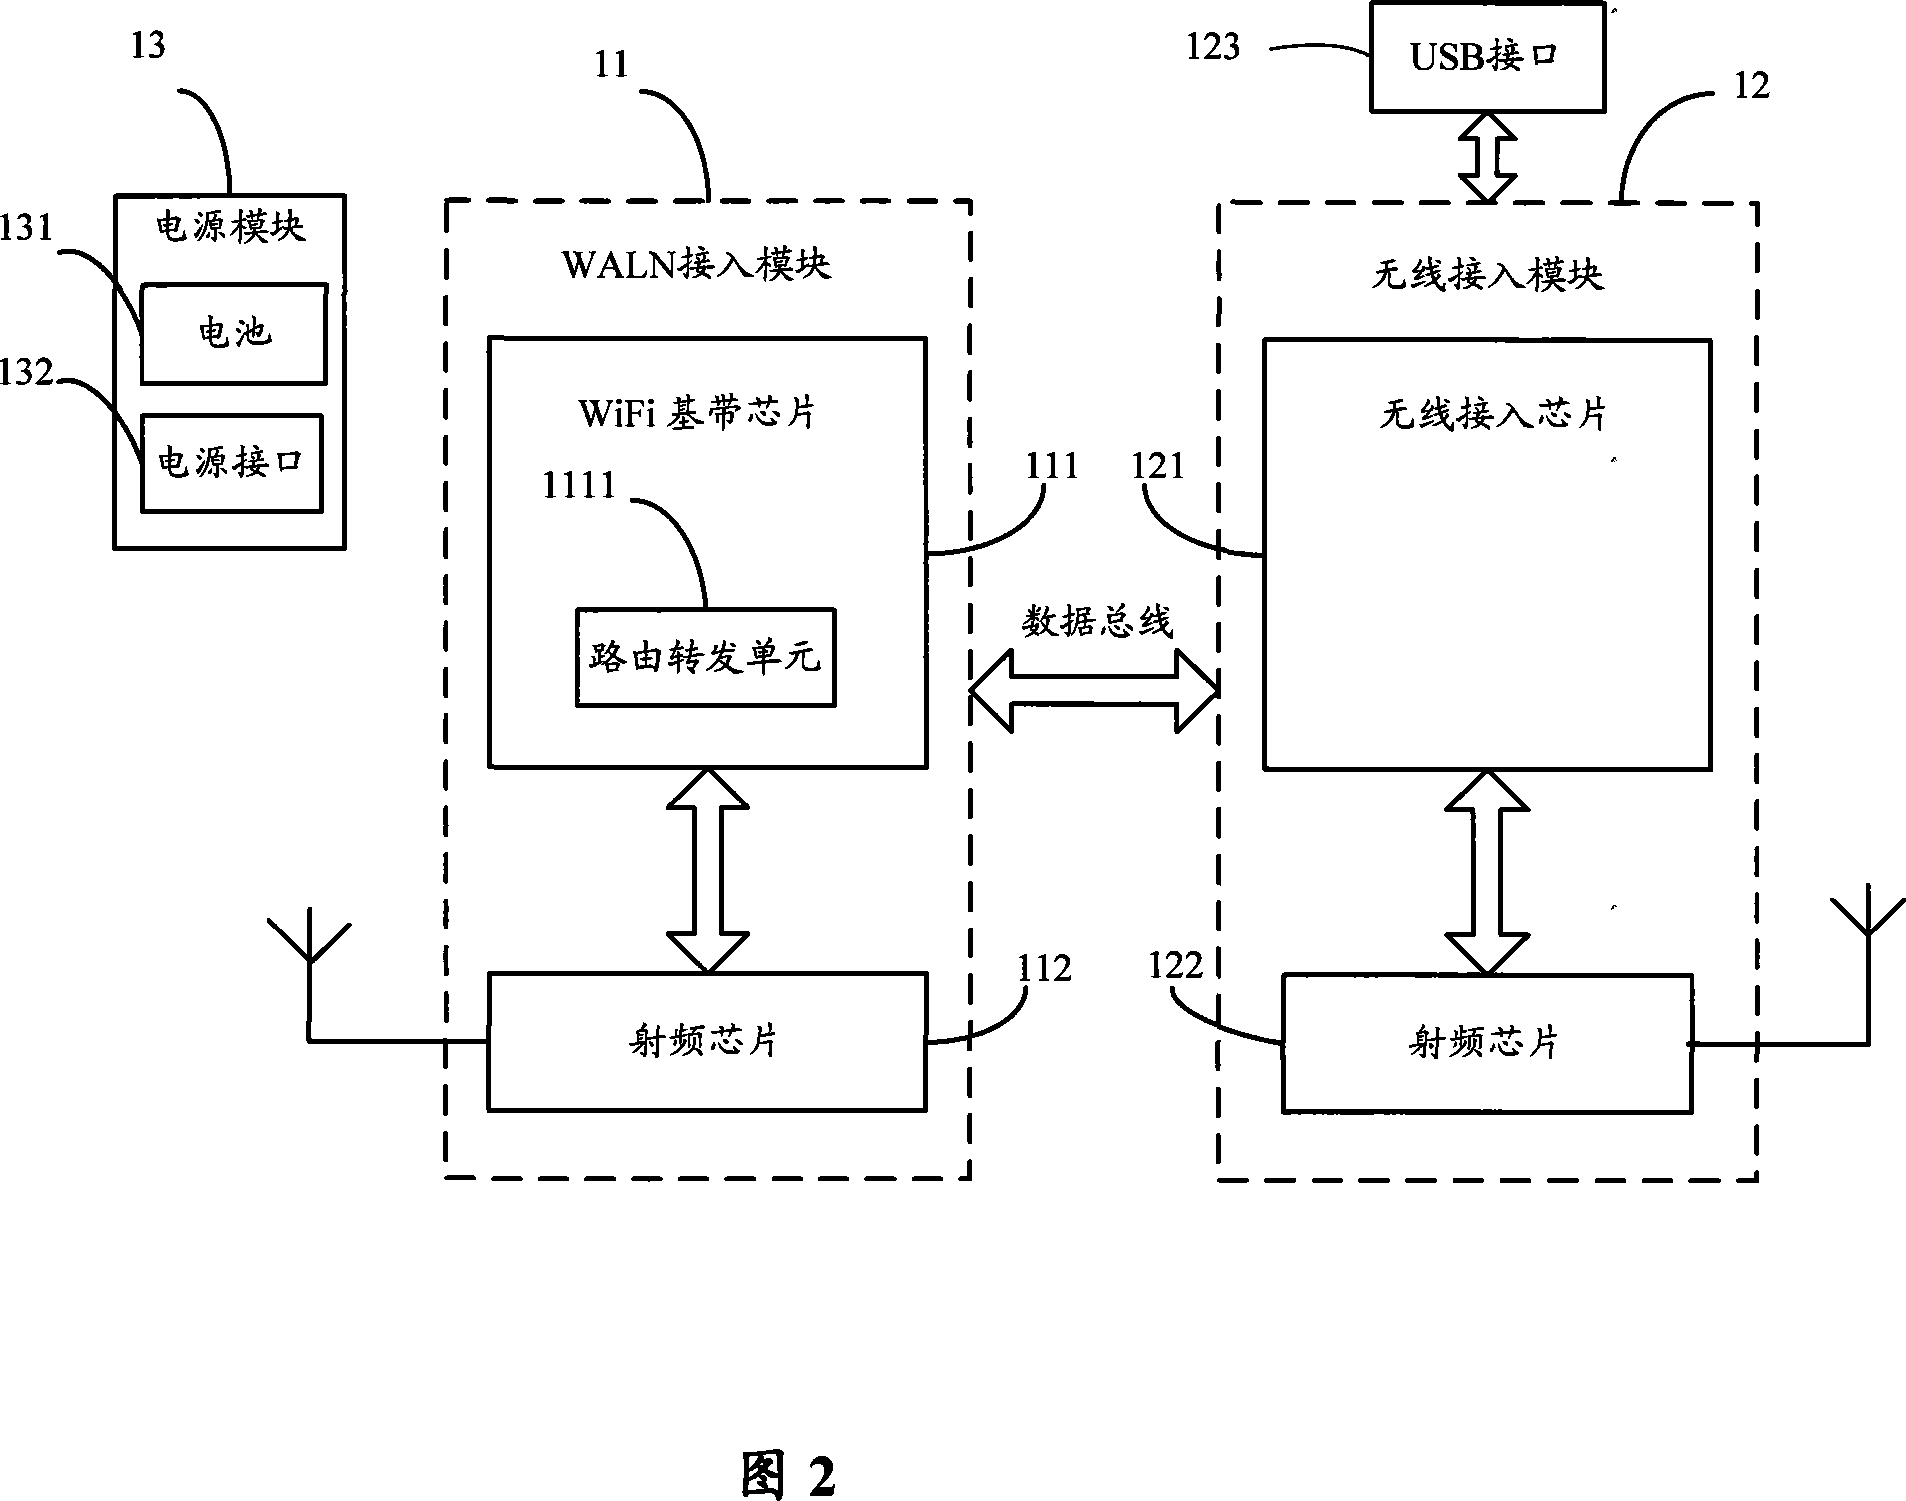 Wireless access device, system and method